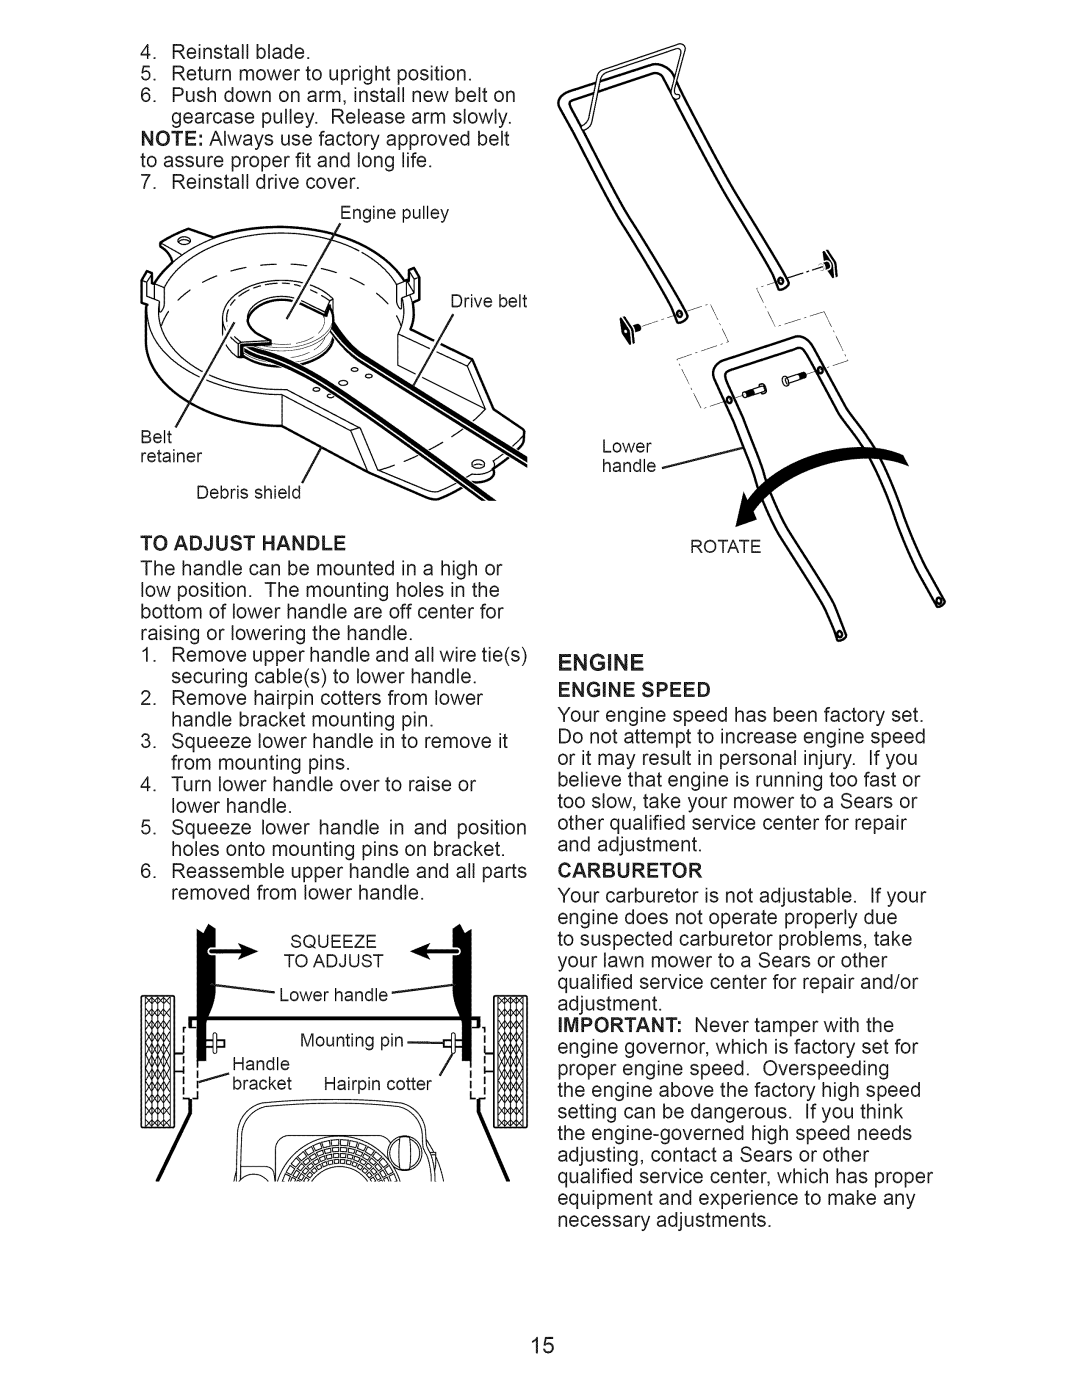 Craftsman 917.375010 owner manual Reinstall blade, Return mower to upright position, Reinstall drive cover, Engine 